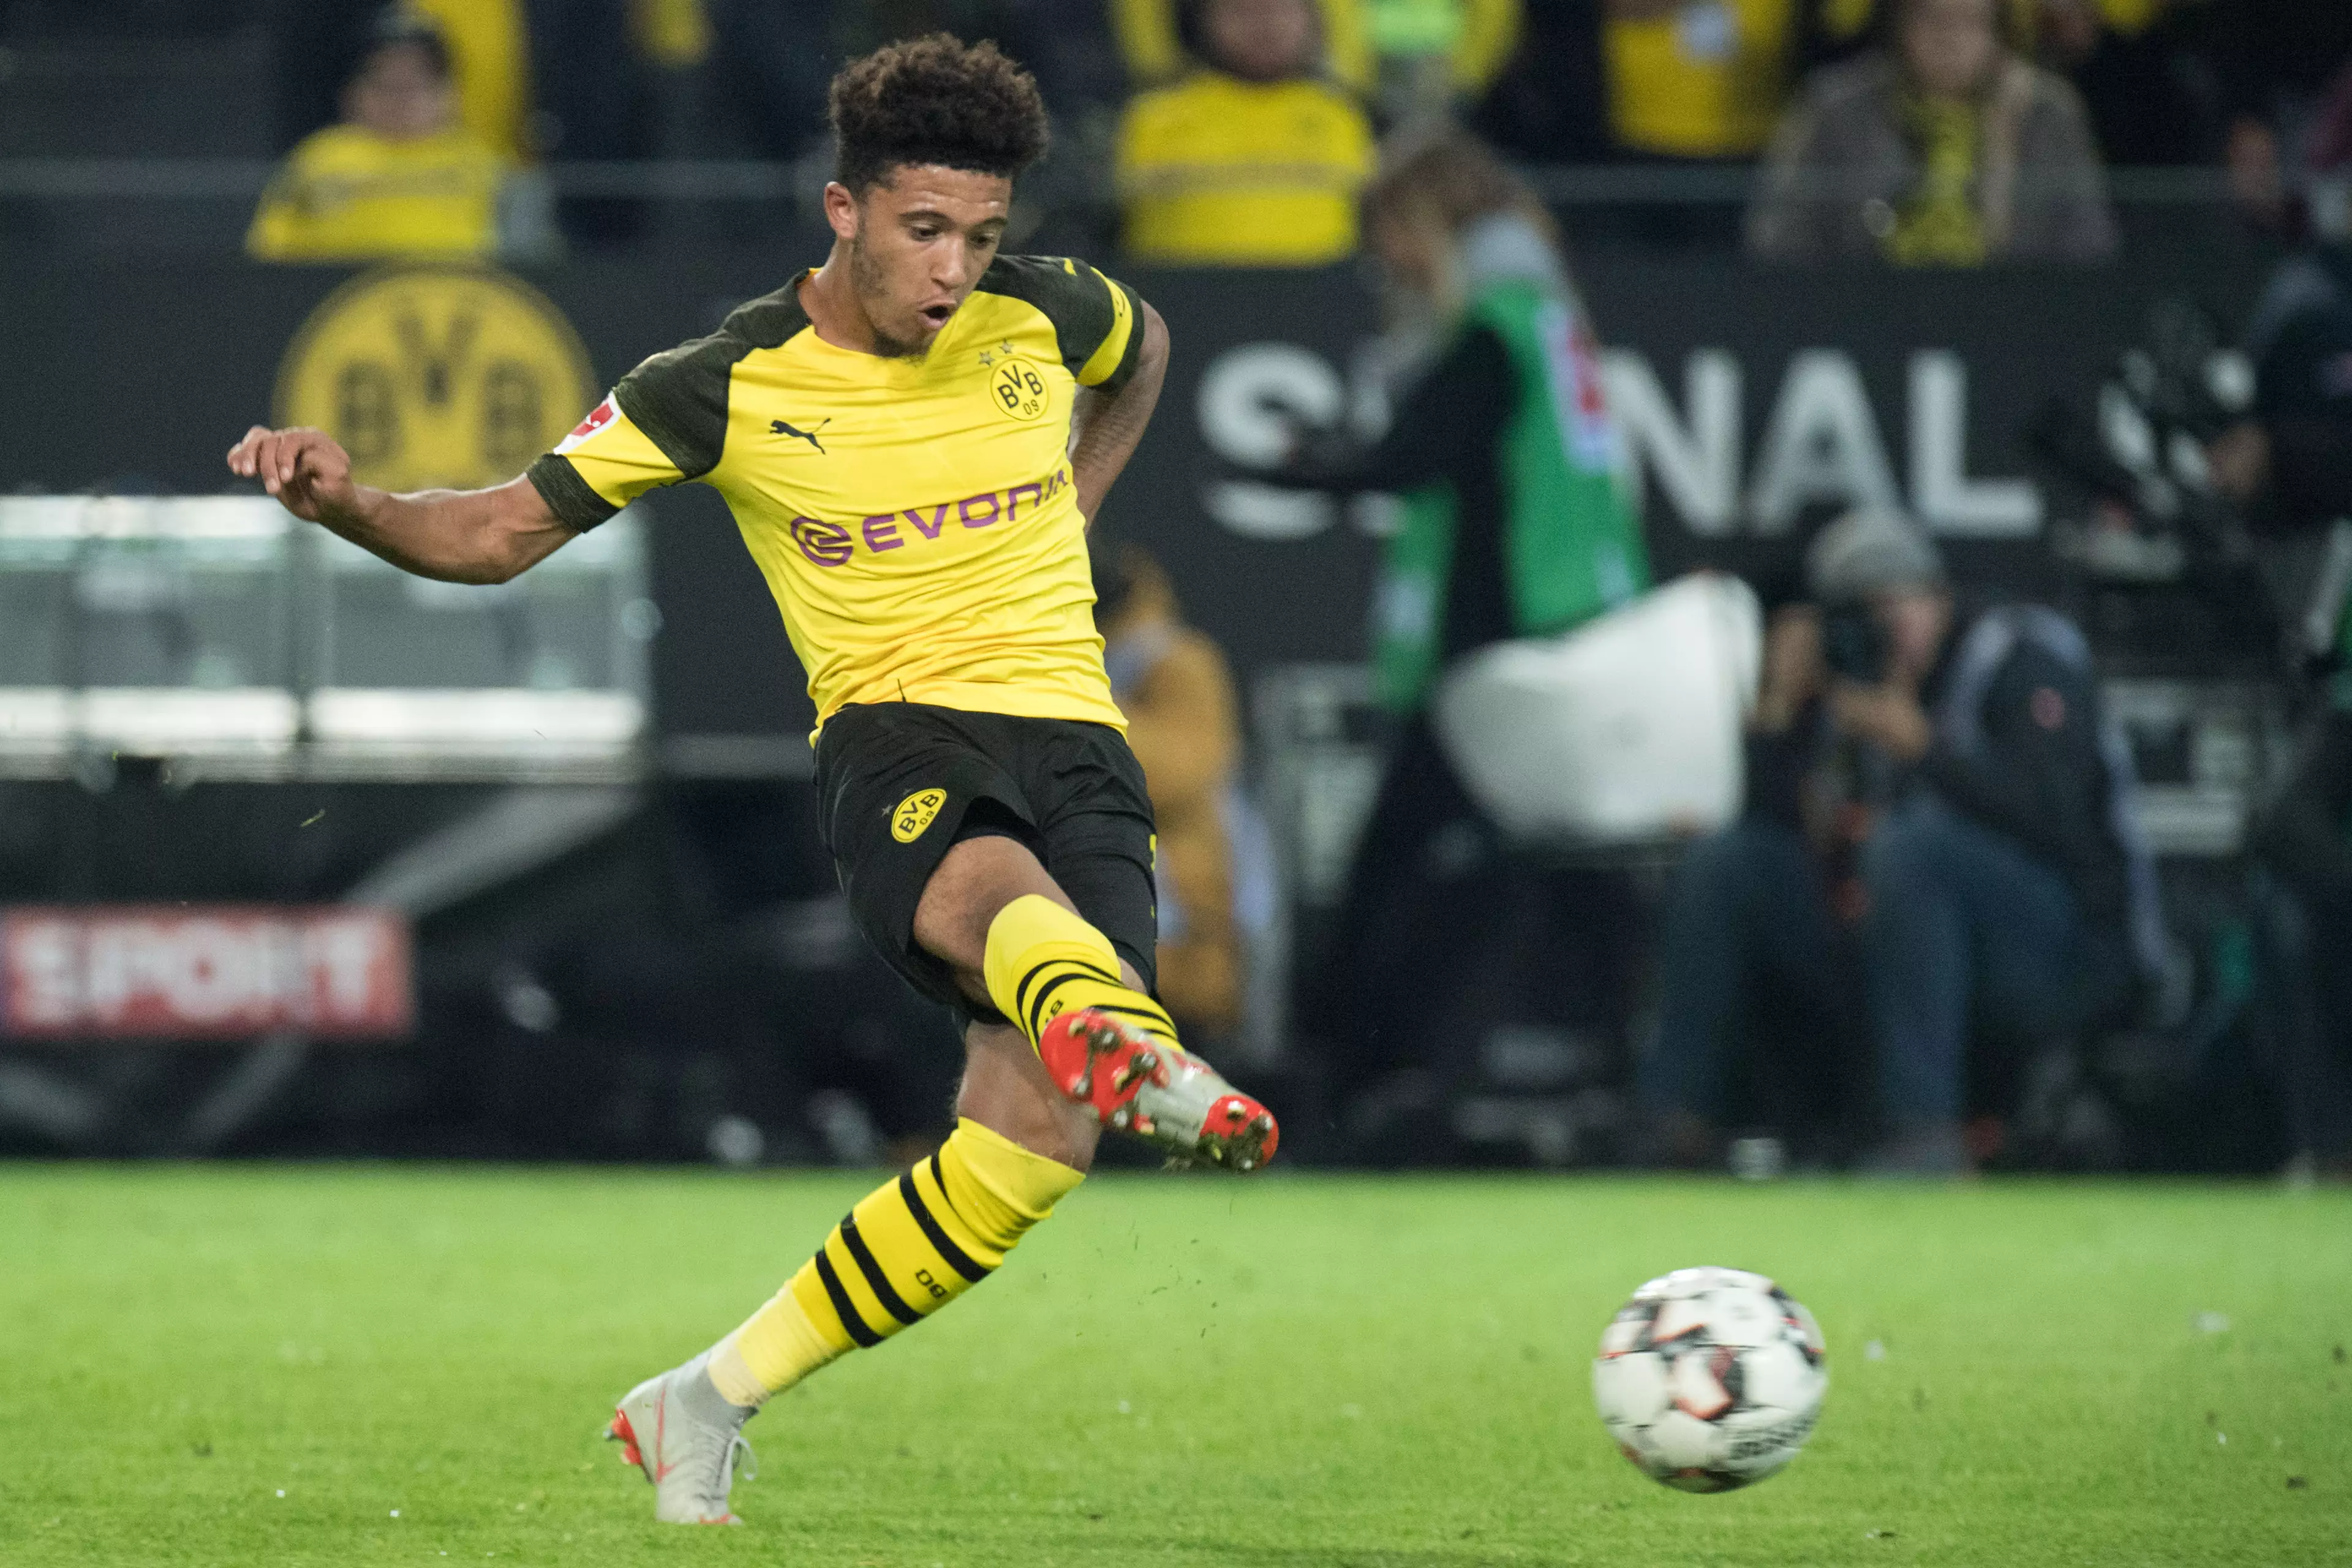 Sancho in action for Dortmund. Image: PA